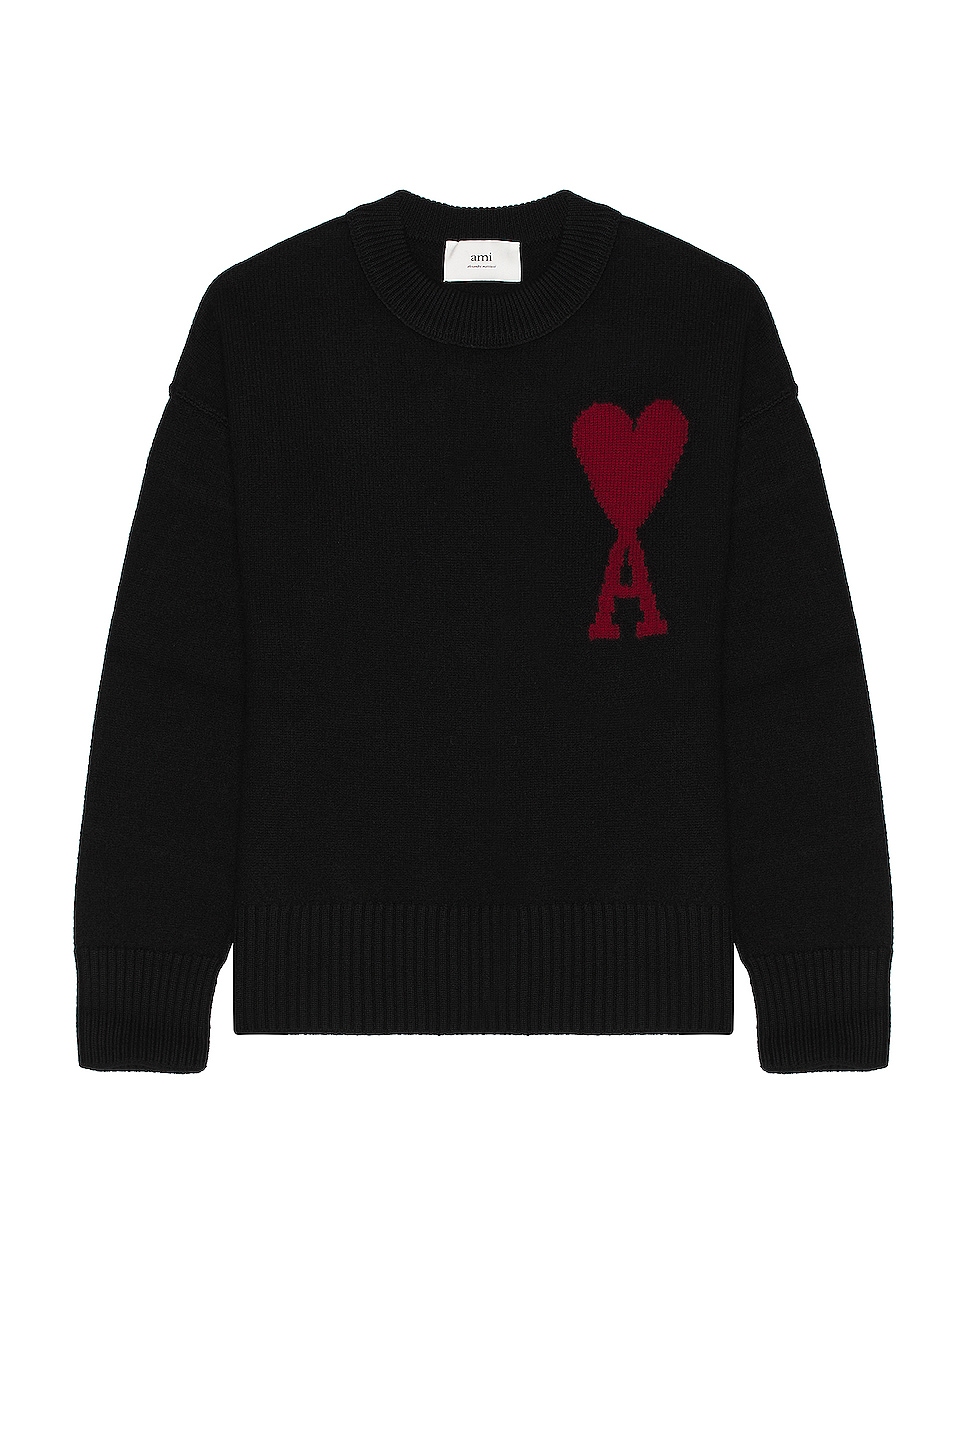 ami Red ADC Sweater in Black & Red | FWRD